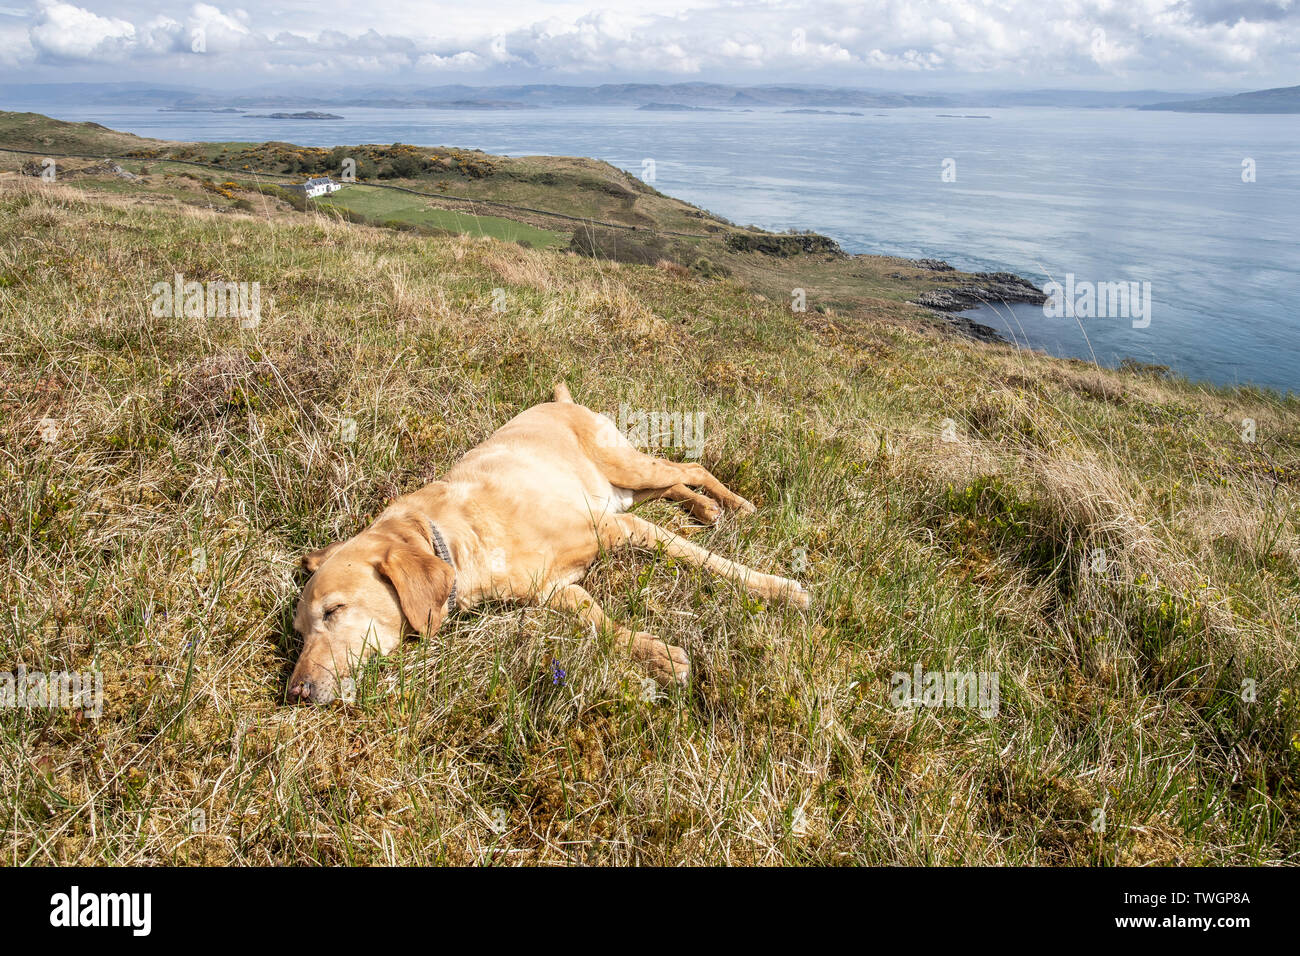 Mallory takes a rest after walking to Barnhill House where George Orwell wrote 1984.  Scarba and the Gulf of Corryvreckan in the background. Stock Photo